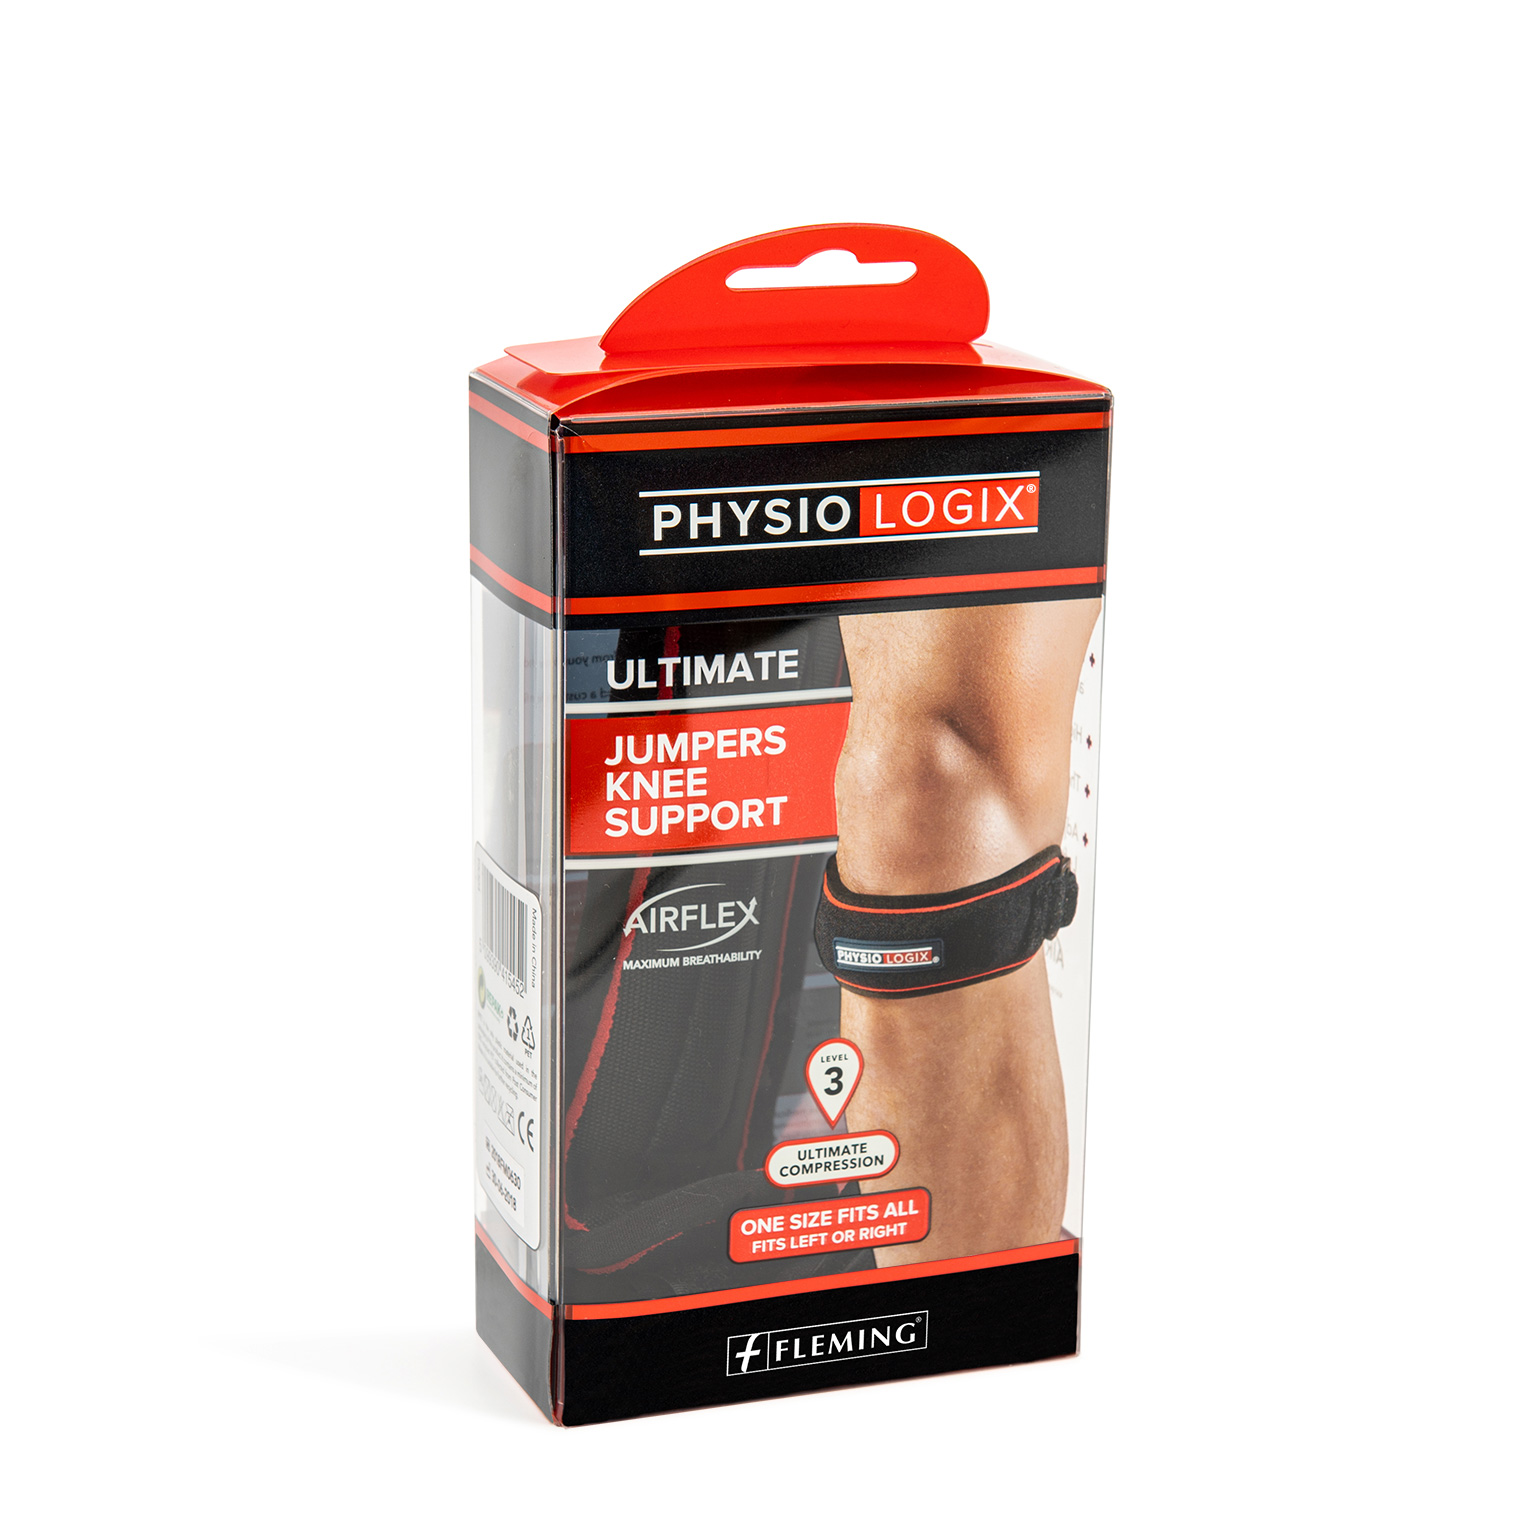 Physiologix Ultimate Jumpers Knee Support